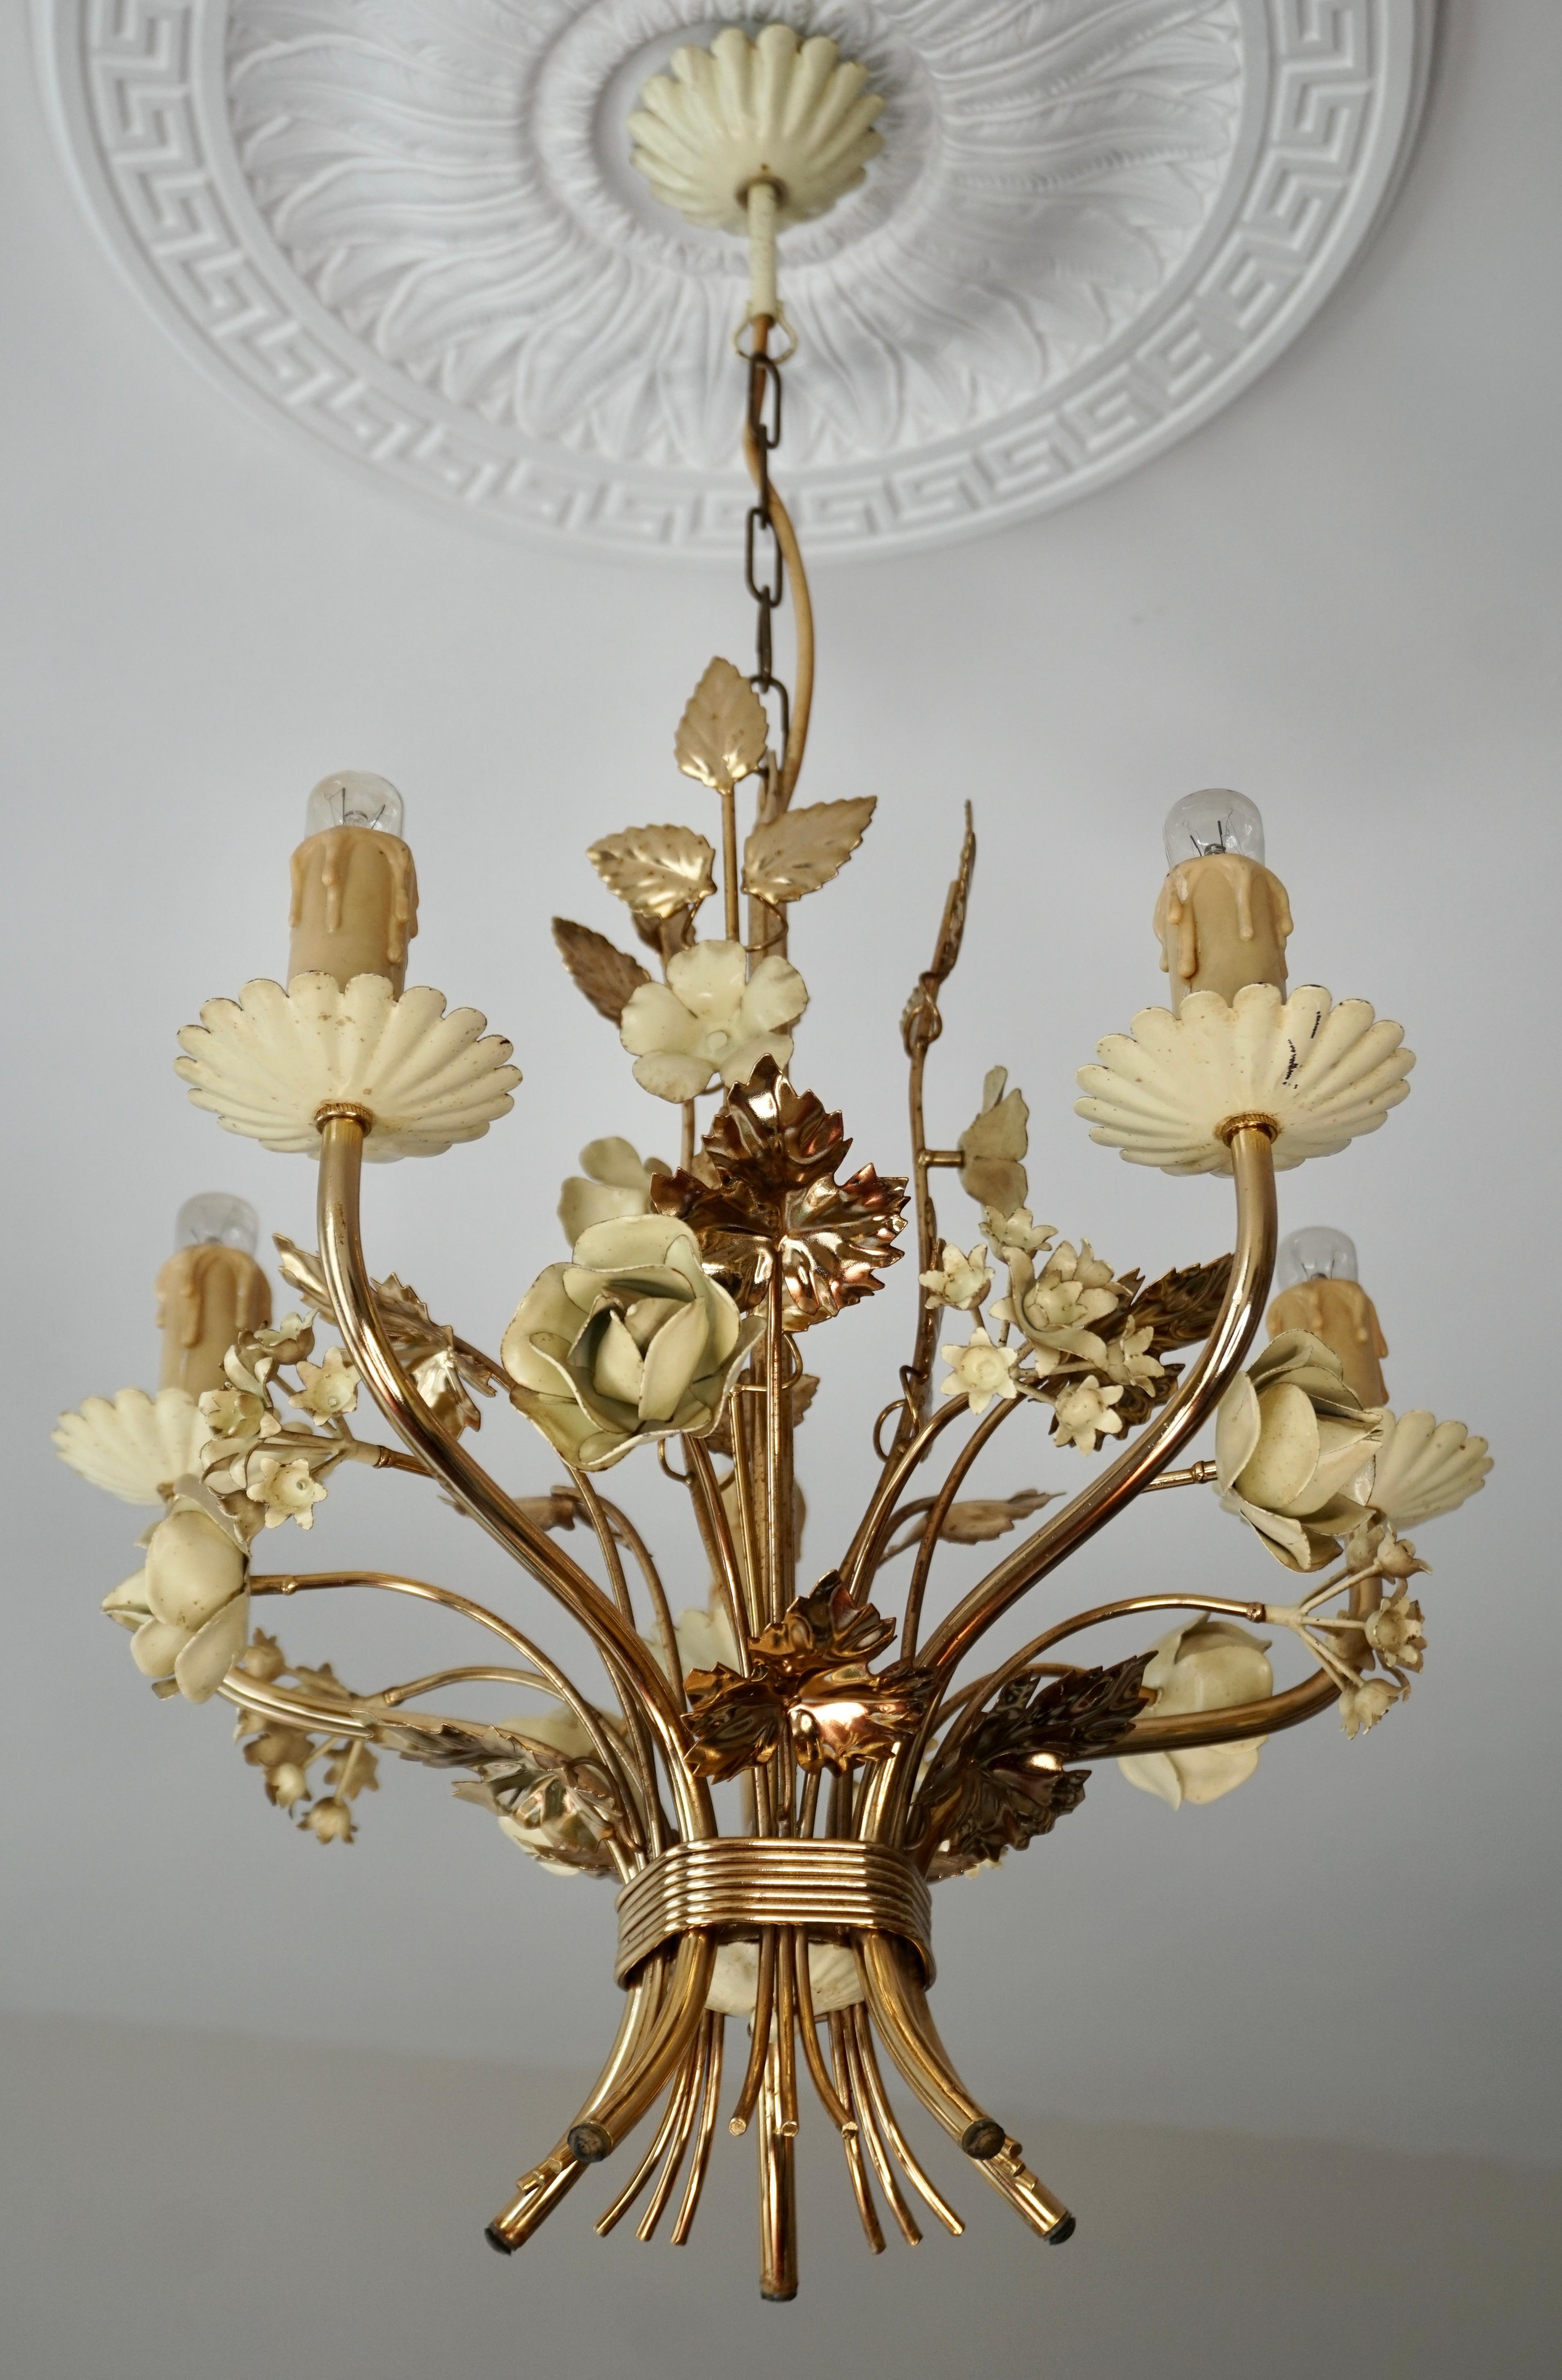 Two beautiful, fine and delicate gilt brass leaves chandelier with white flowers. 
France, circa 1950s. 
Socket: 5 x e14 (Edison) for standard screw bulbs.

Total height 72 cm.
Please note that price is per item not for the set.